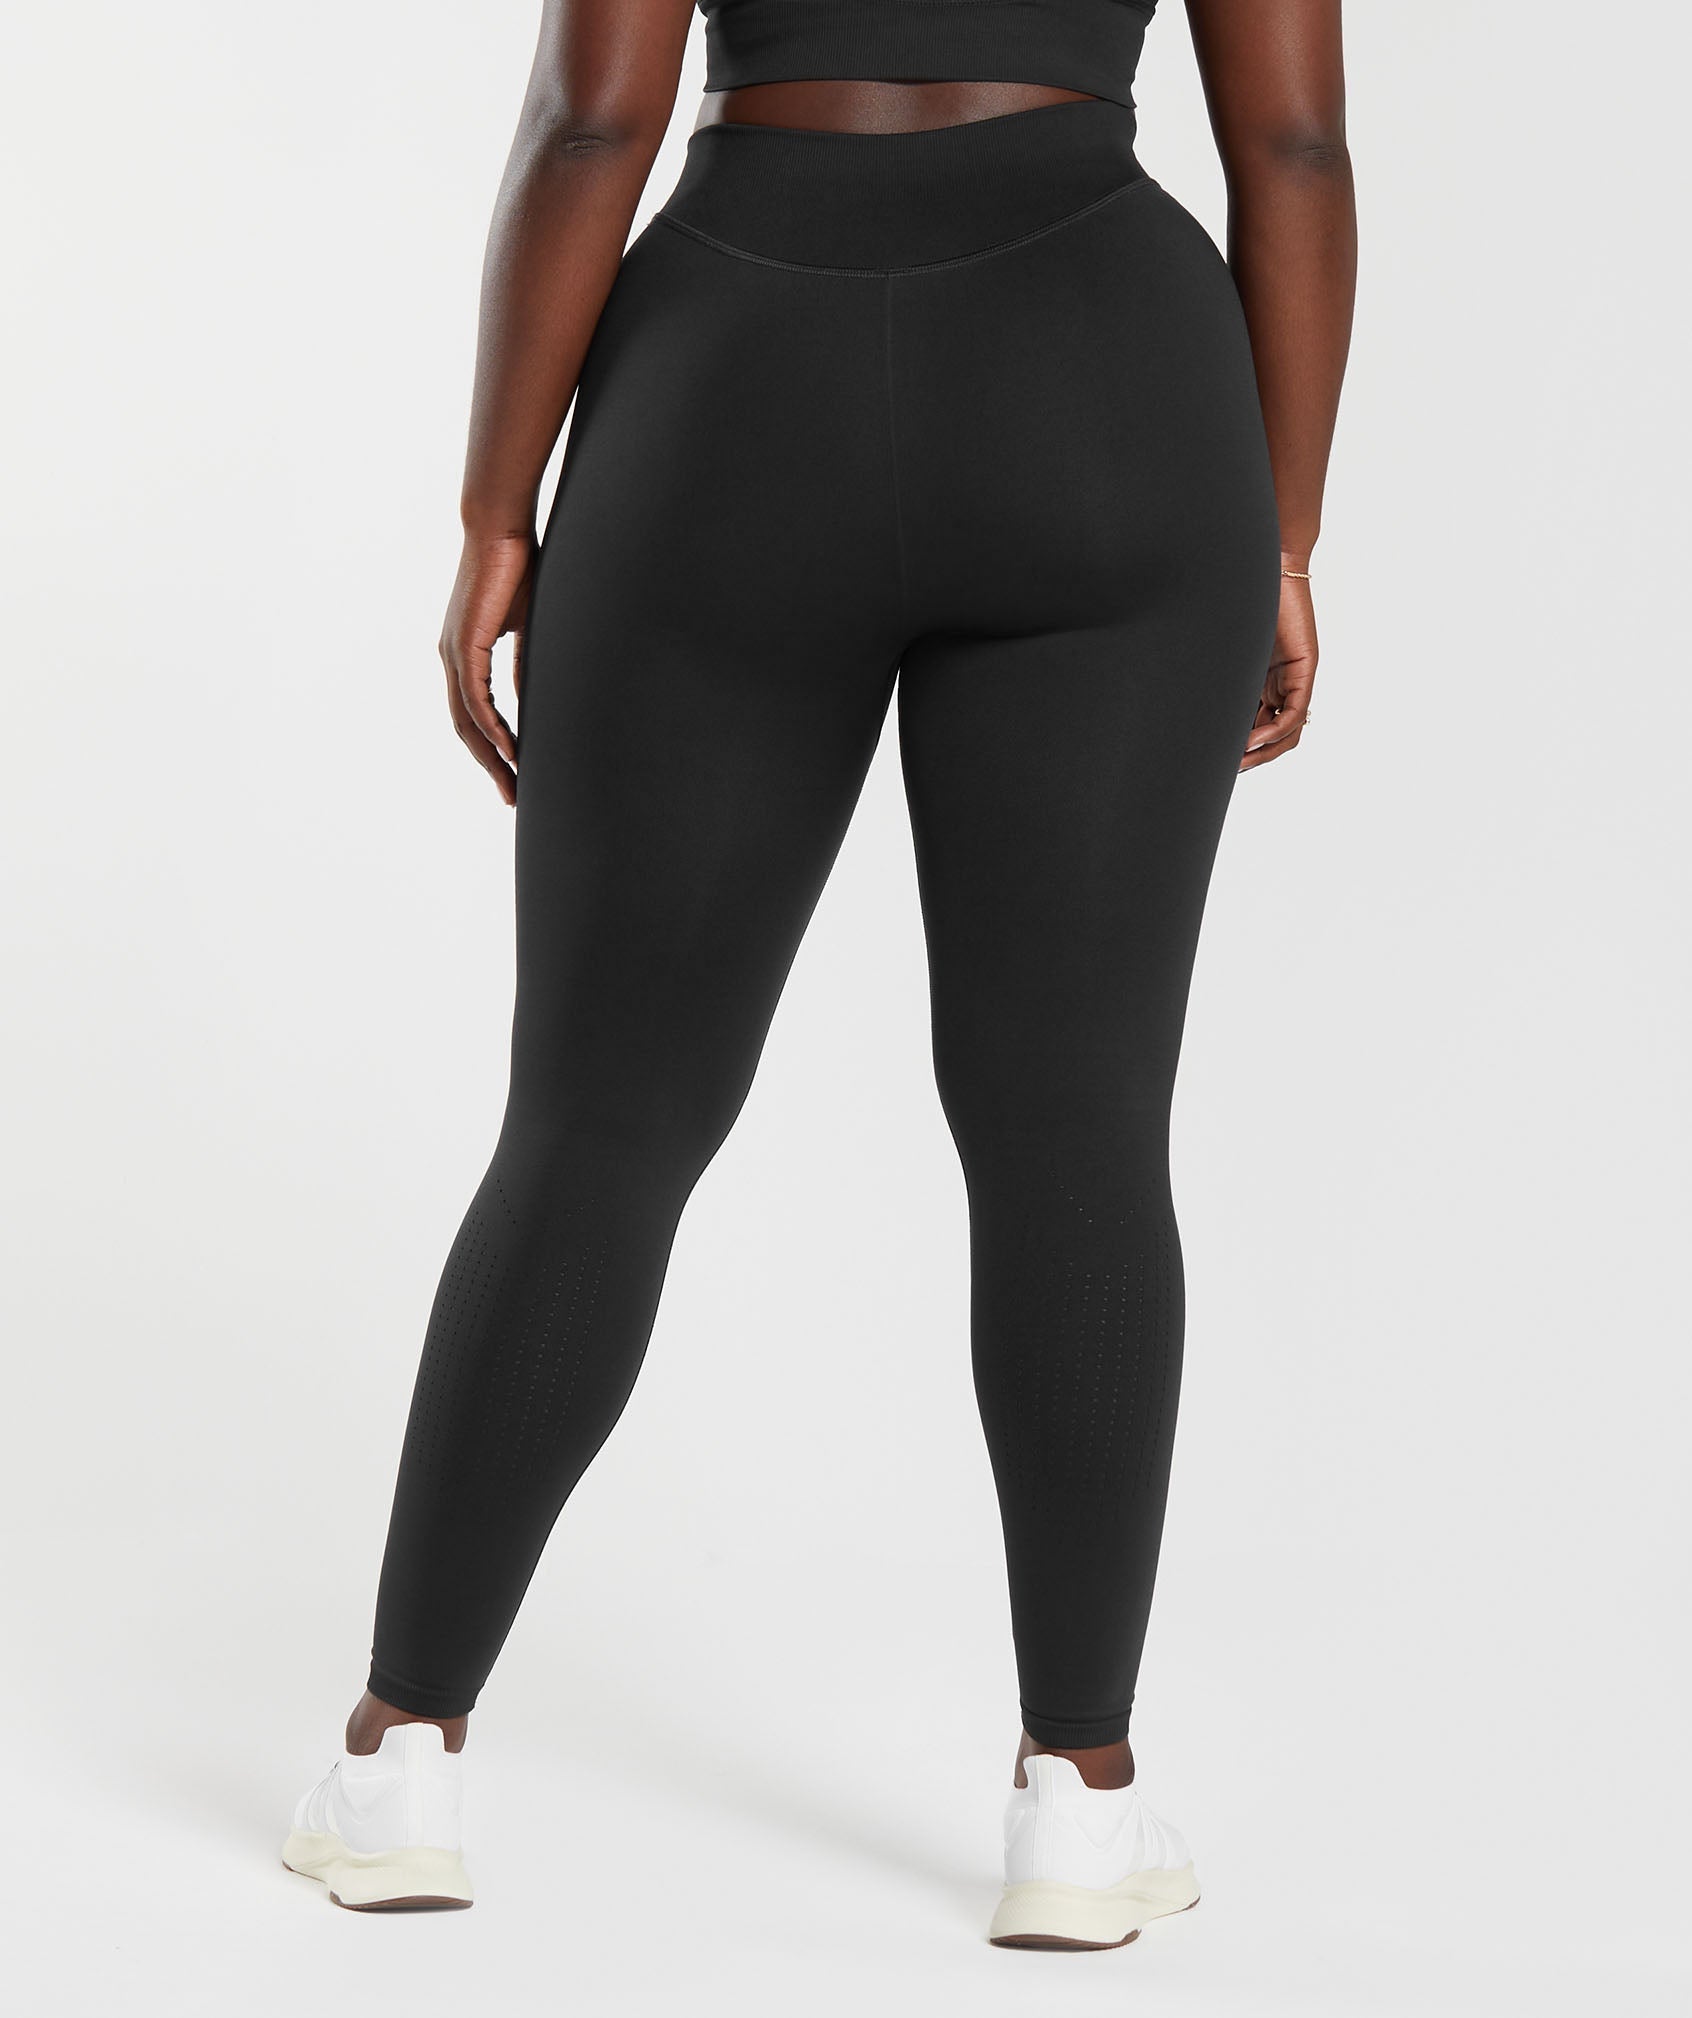 Gymshark Black Camo Seamless Leggings Size XS - $31 (48% Off Retail) - From  Spencer